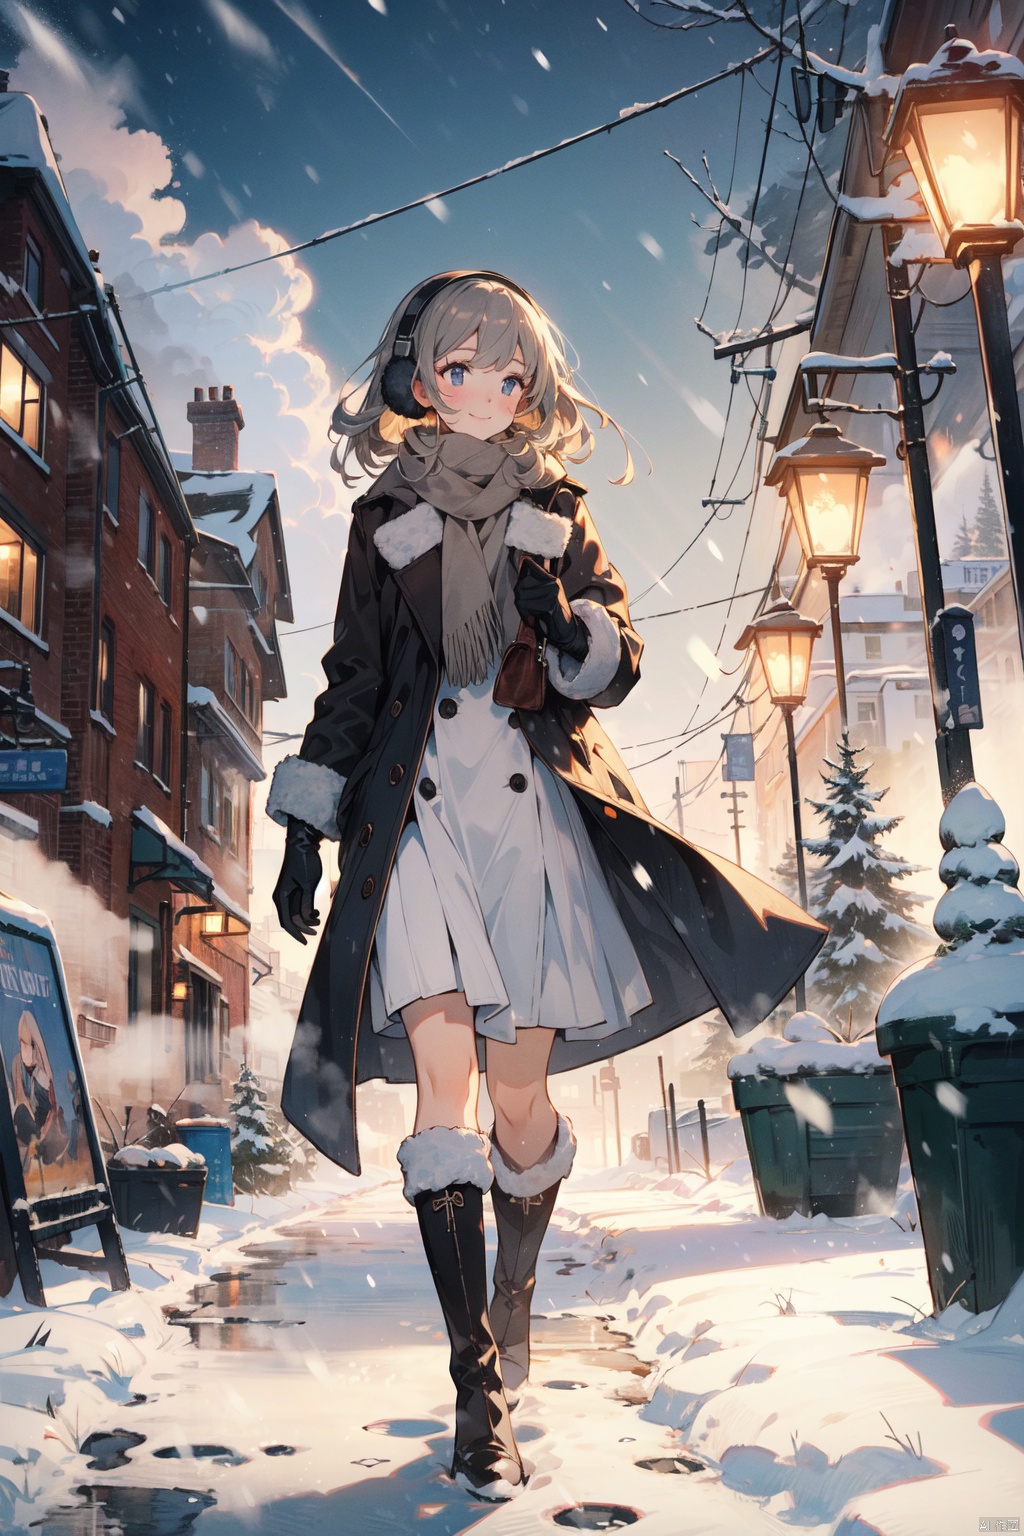 Girl, winter portrait, snowy background, long coat, fur collar, leather gloves, over-the-knee boots, woolen dress, smile, windblown hair, standing near a street lamp, snowflakes falling and accumulating on clothing, retro environment , neutral tones, subtle makeup, flushed cheeks, melancholy smile, bundled up, walking in the snow, cityscape background, moonlit night, tightly wrapped scarf, earmuffs, steam rising from a nearby coffee shop , the warm yellow light shines on the road, capturing the quiet and lonely beauty of winter